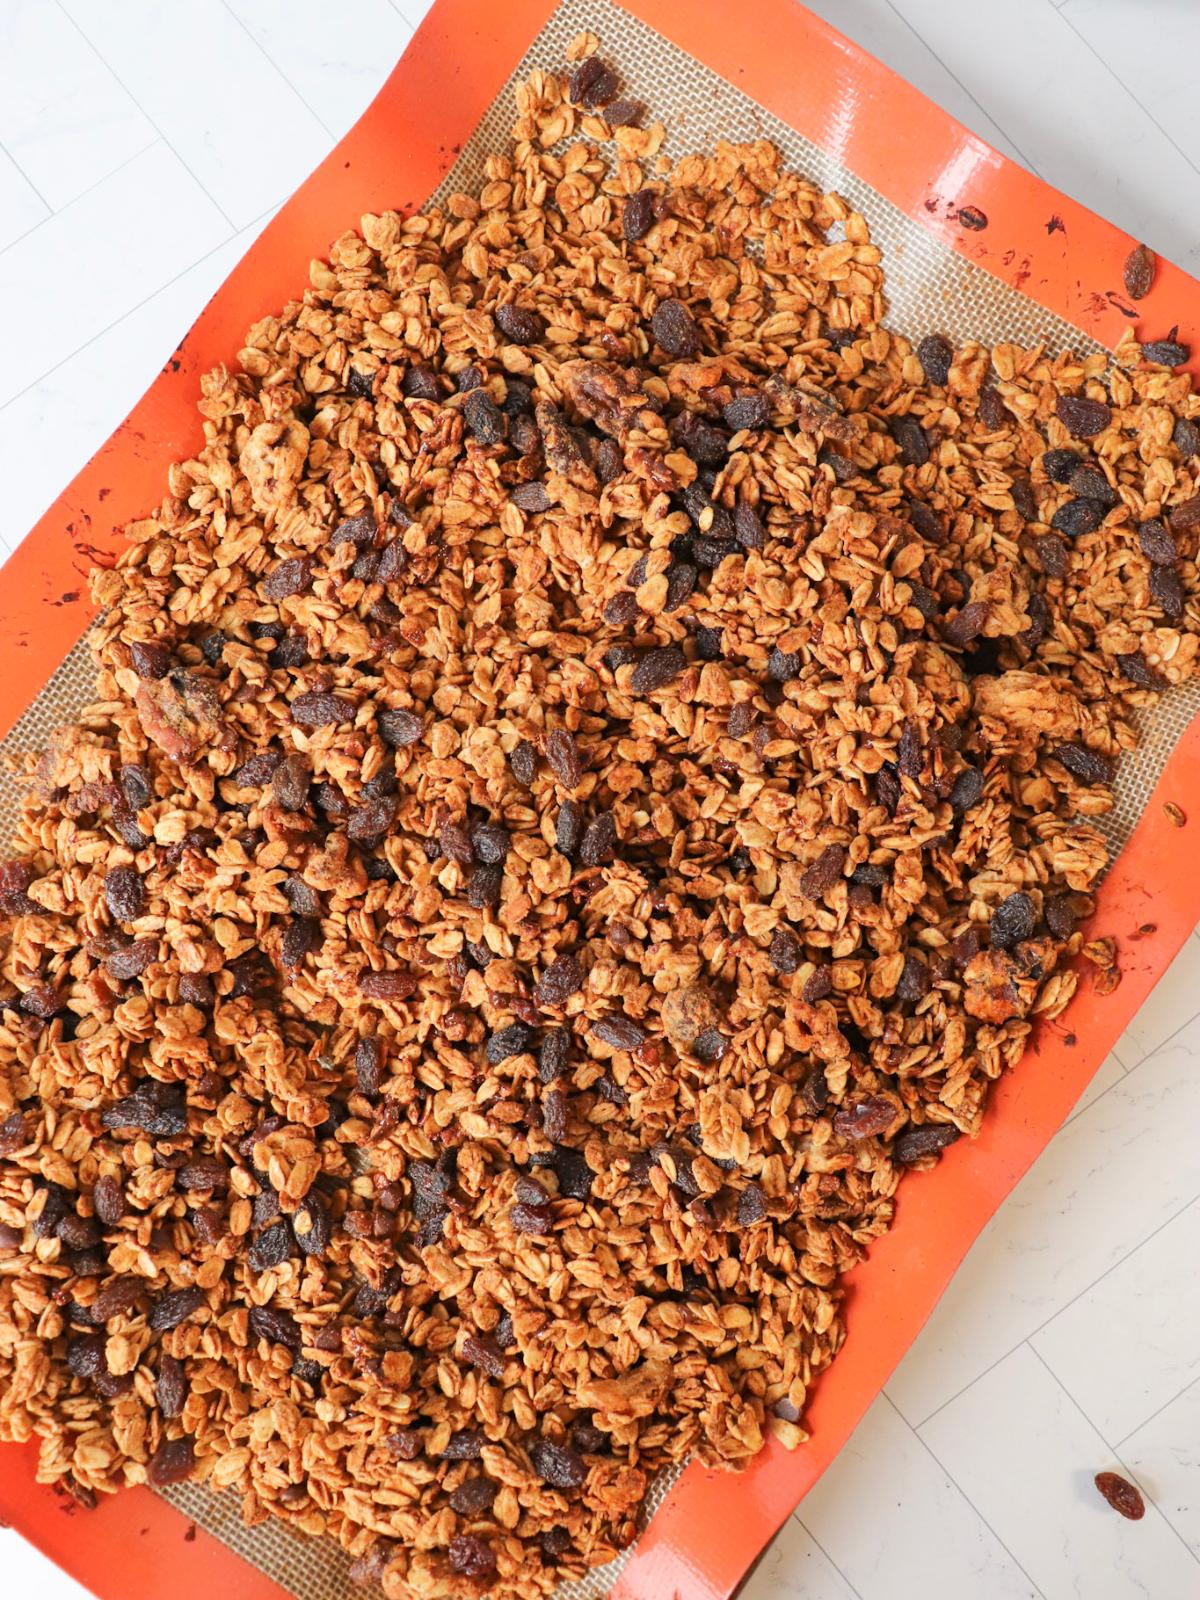 Vegan granola with raisins and chocolate chips on a baking sheet.